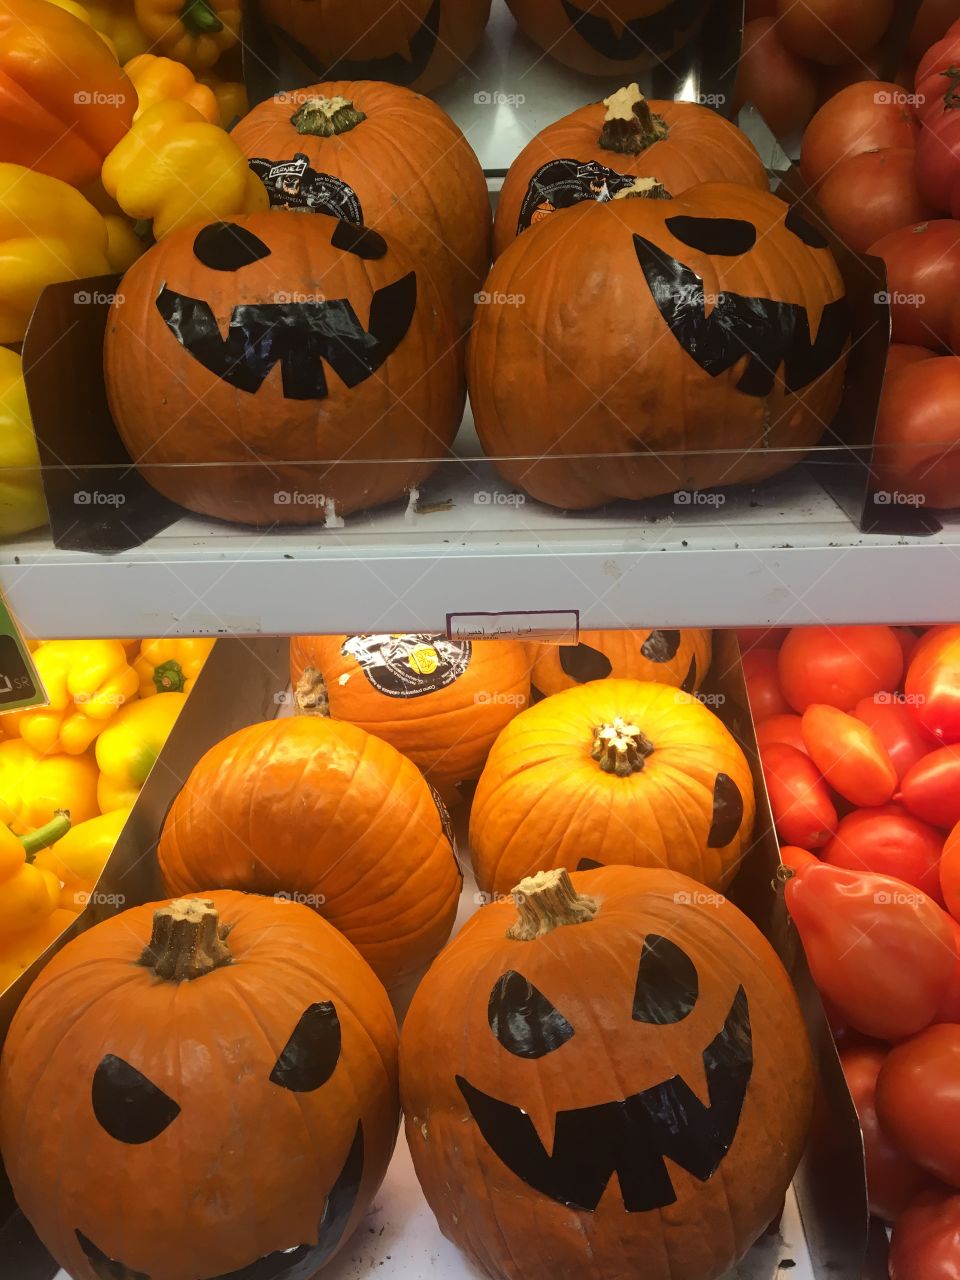 October is the scary pumpkin time 